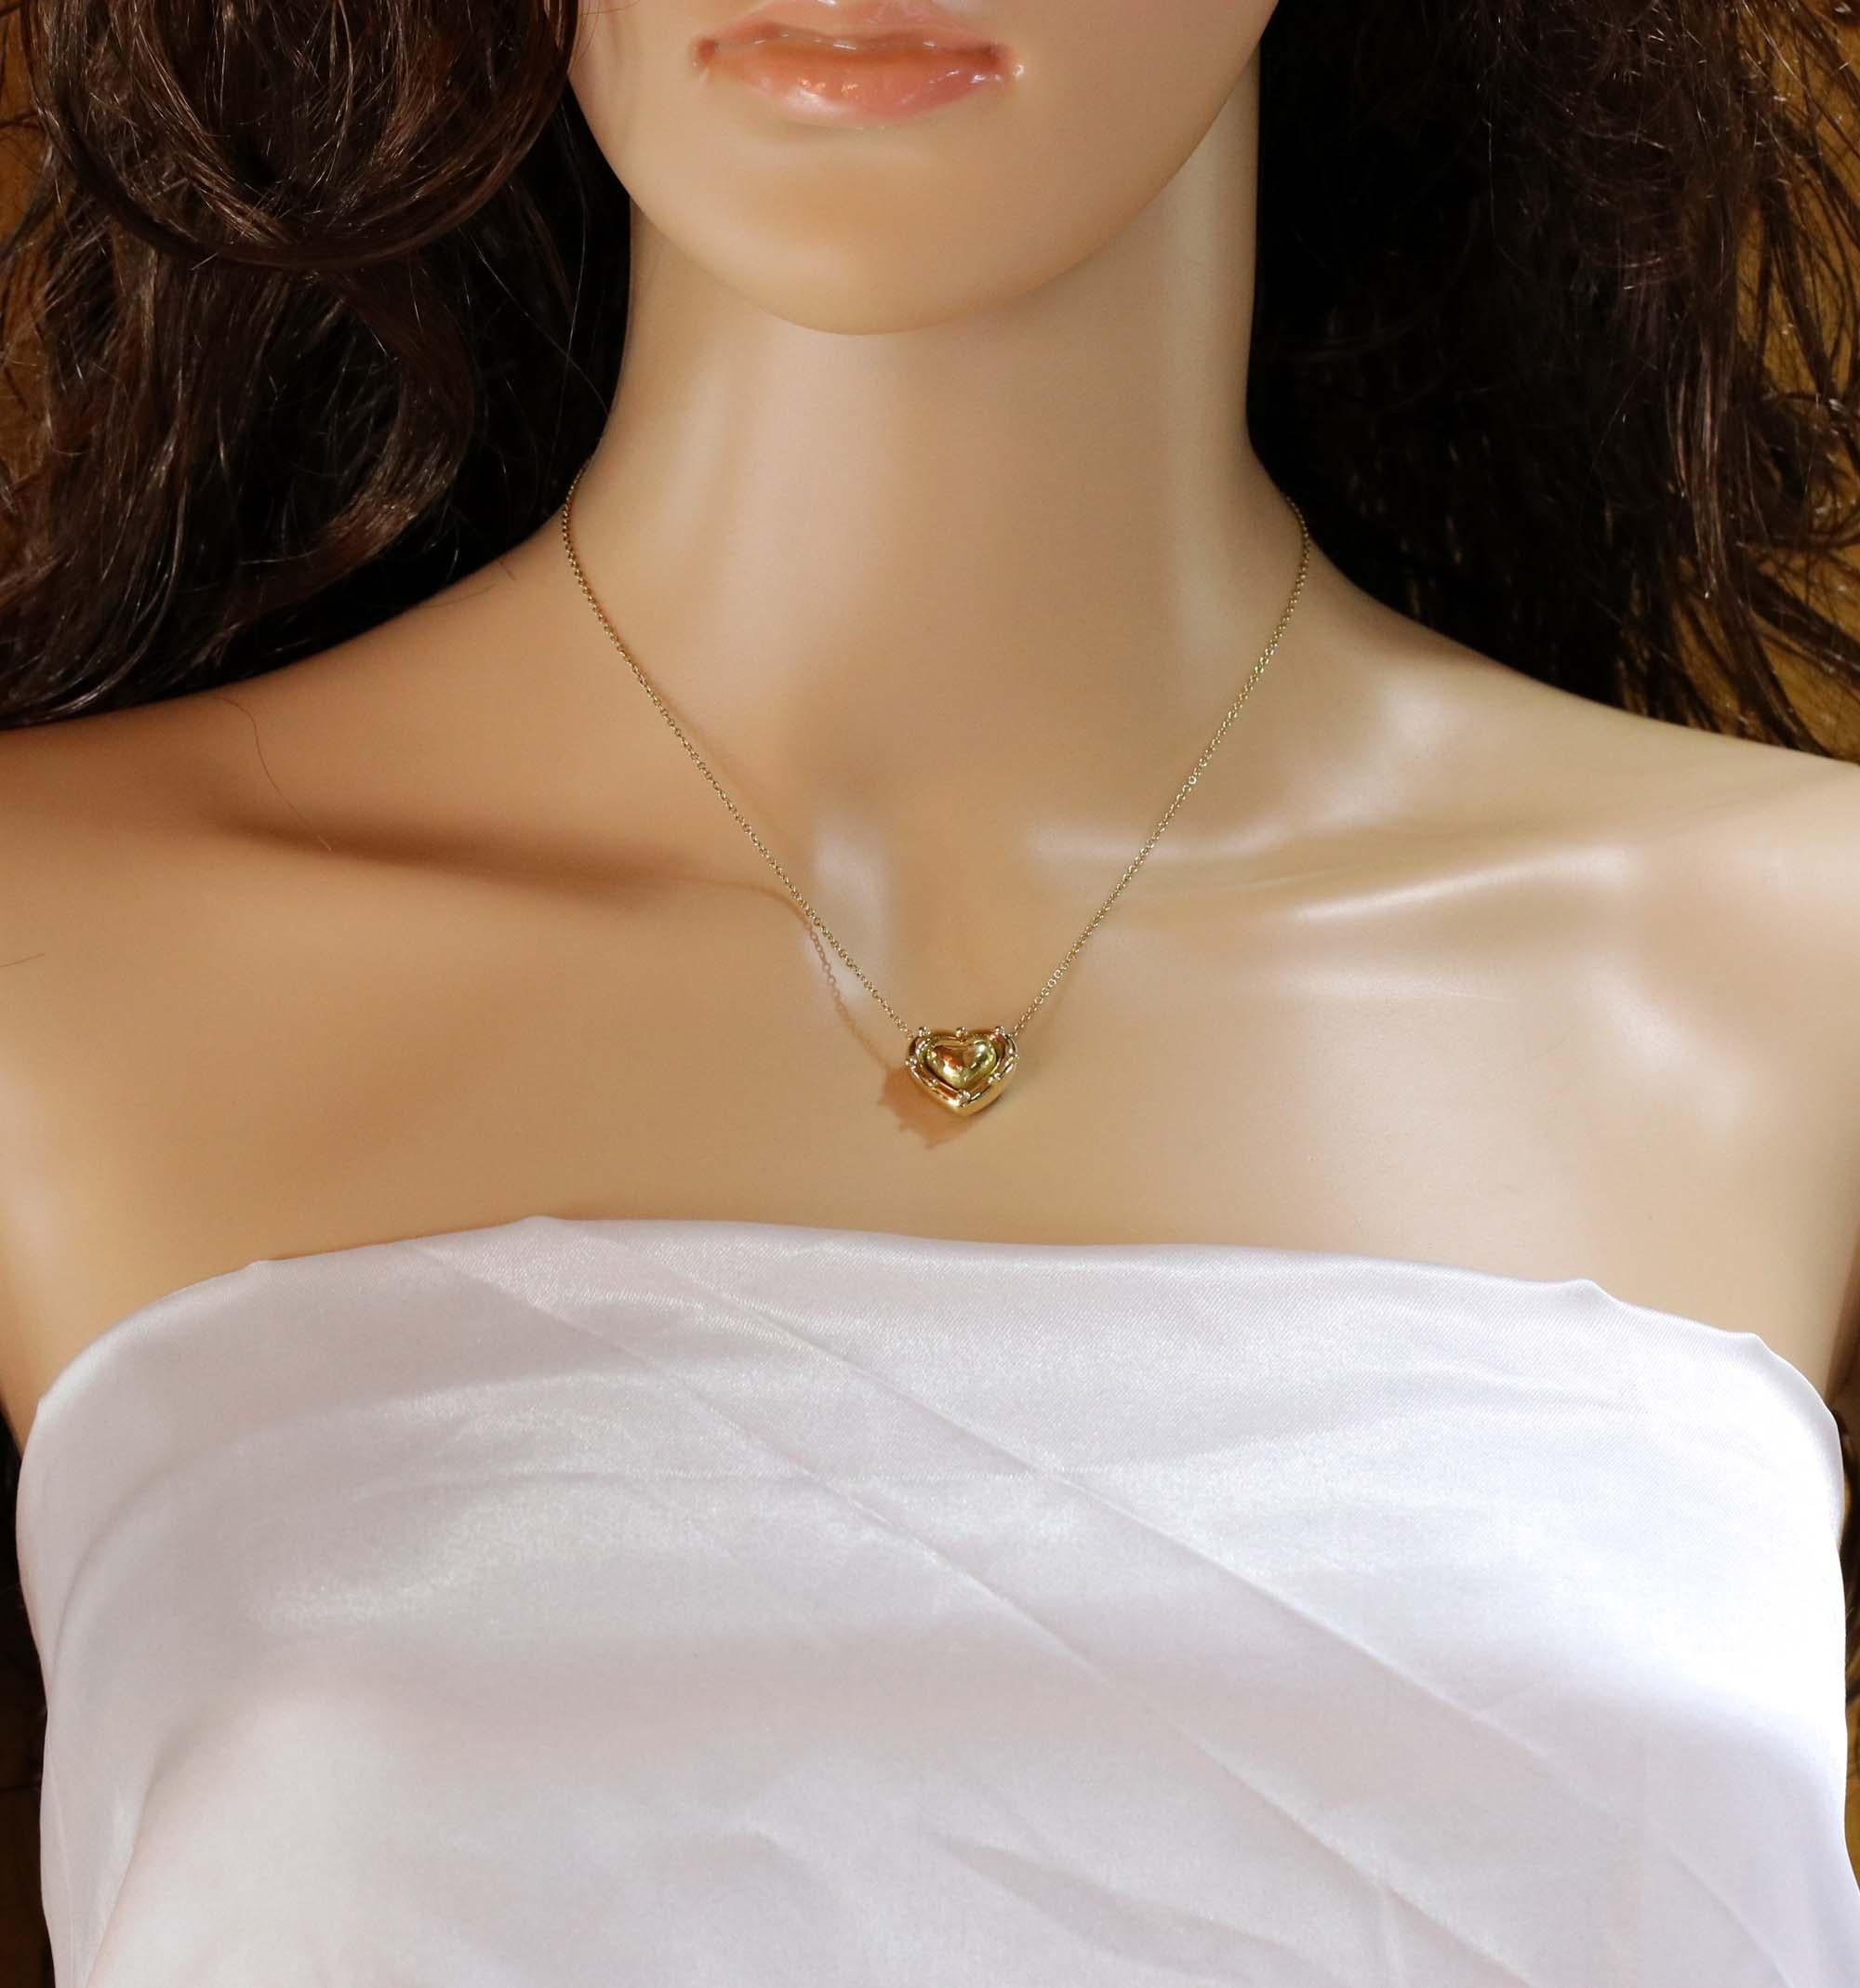 A ladies 18 karat yellow gold puffed heart pendant featuring a beaded edge suspended on a 15 inch 18K gold, cable link chain. The heart measures 5/8